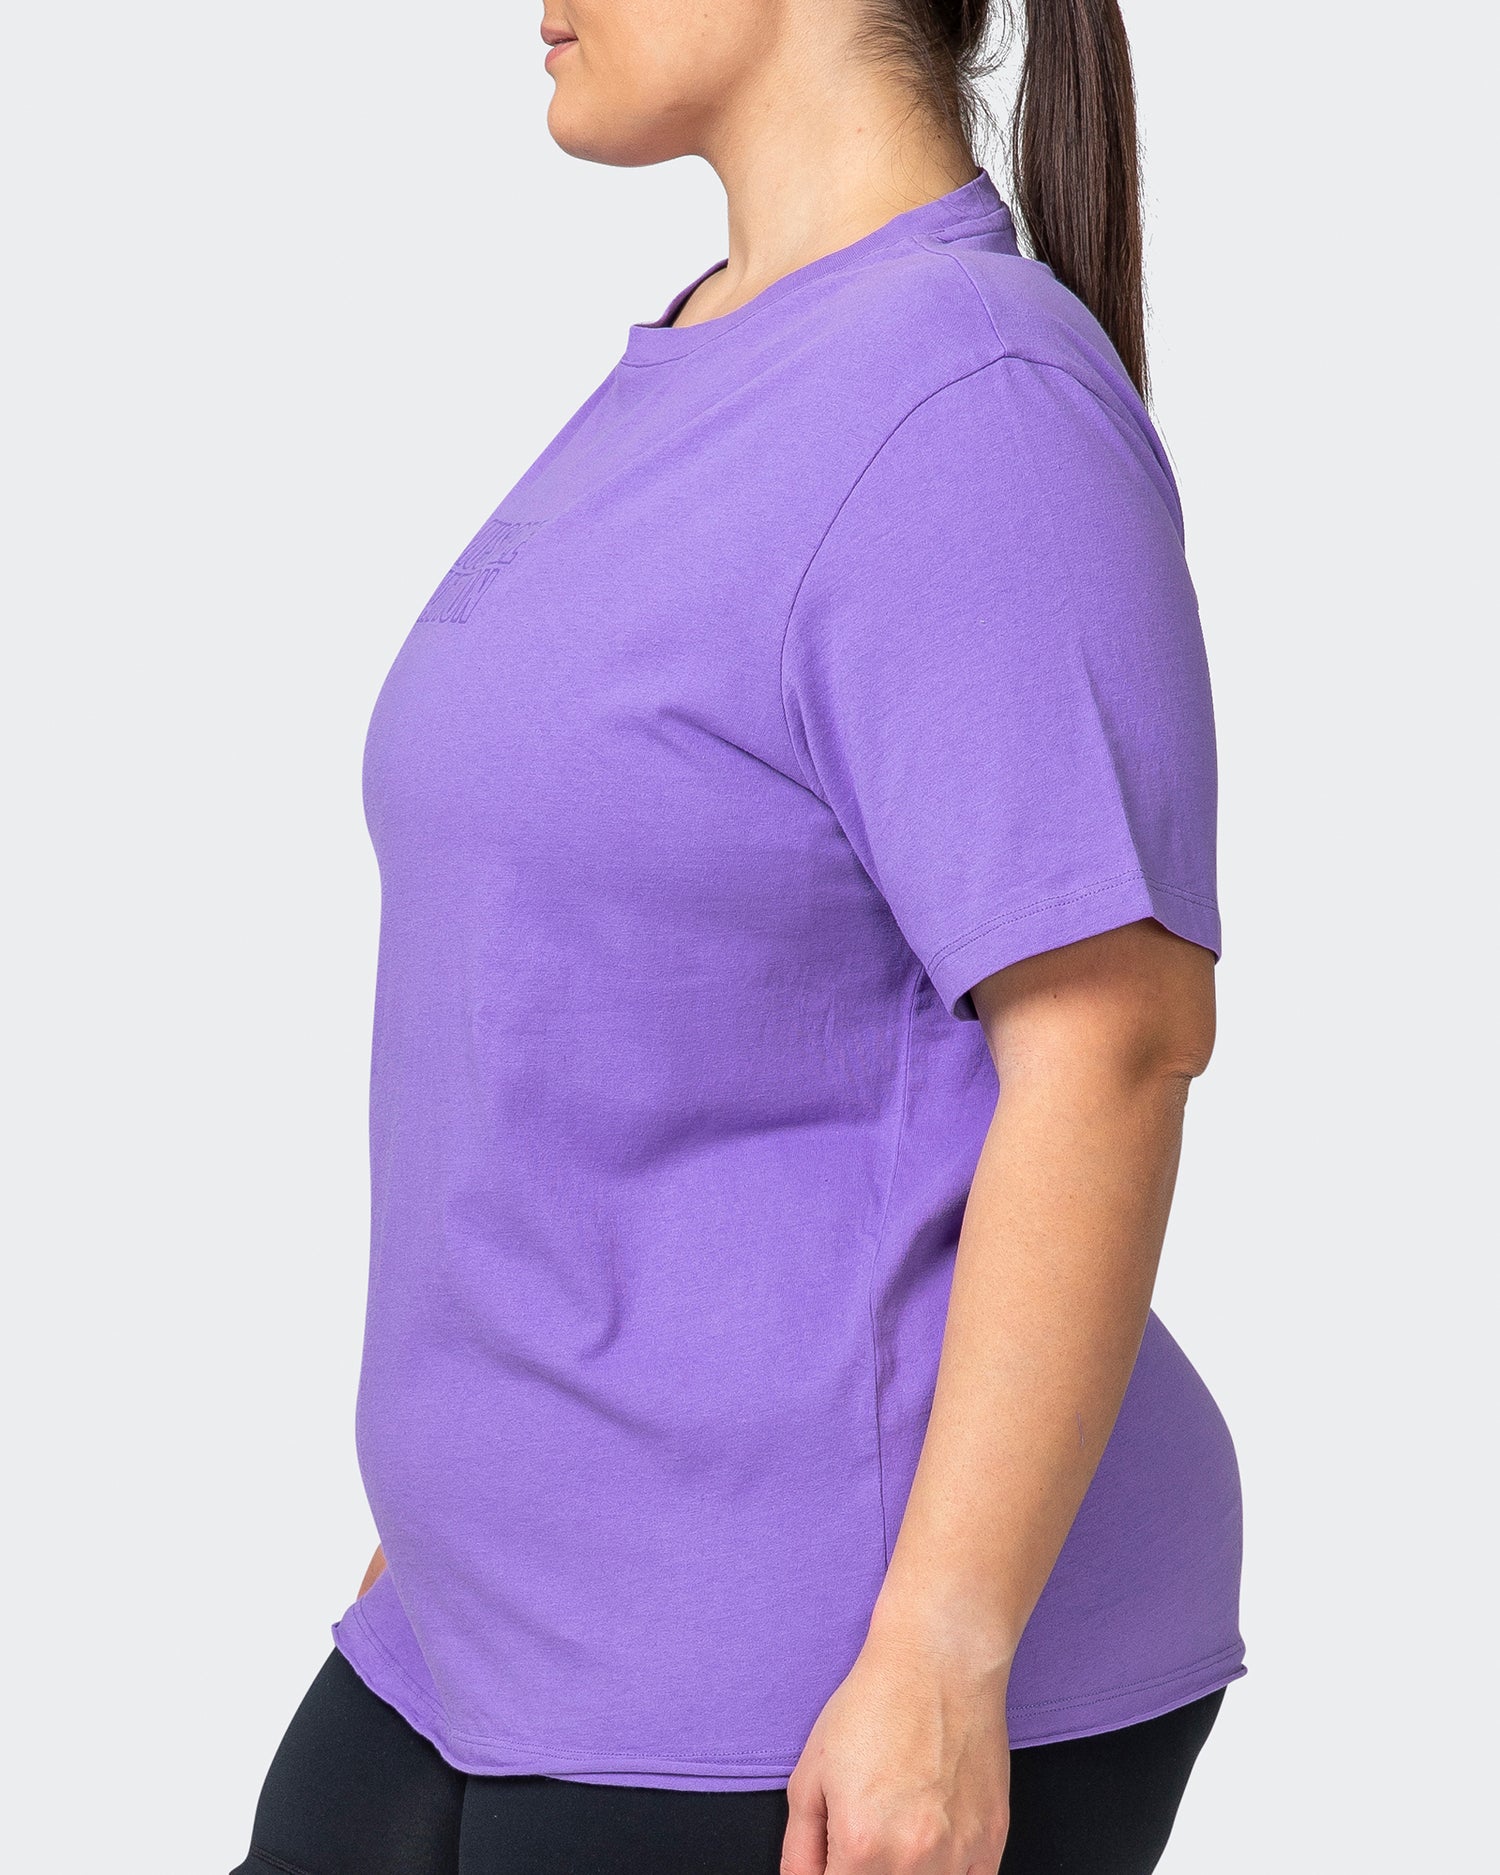 Classic Regular Fit Vintage Tee - Washed Aster Purple